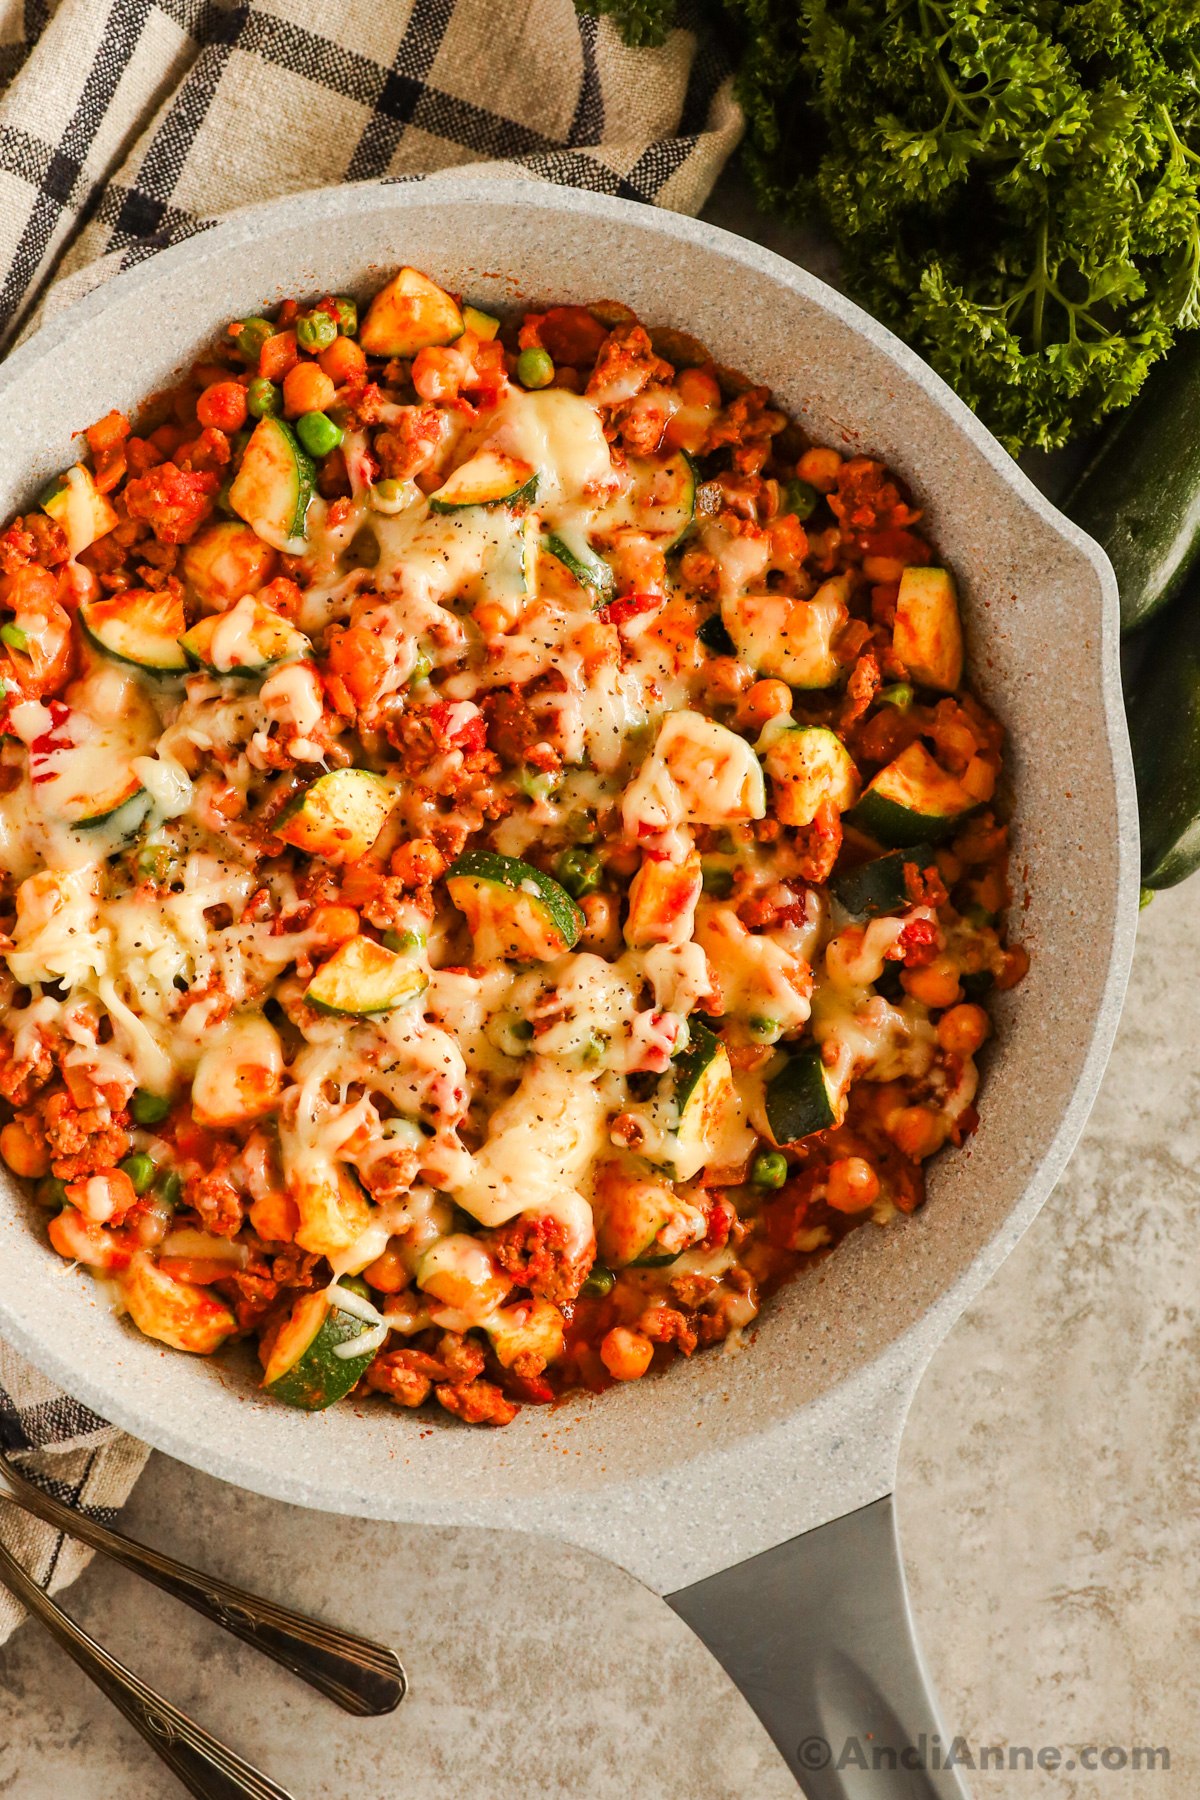 Frying pan with ground turkey zucchini chickpea recipe topped with melted mozzarella cheese.